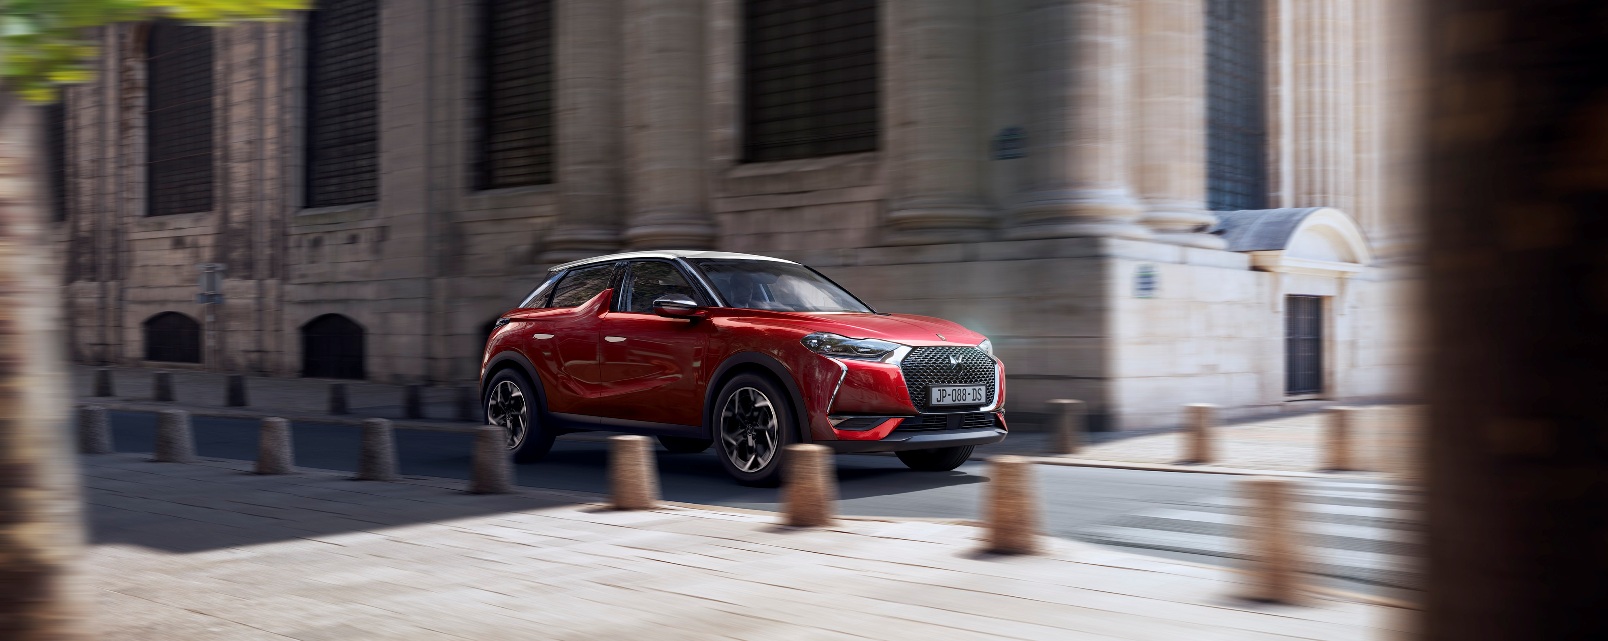 Ds 3 Crossback Connected Chic 2 (1)